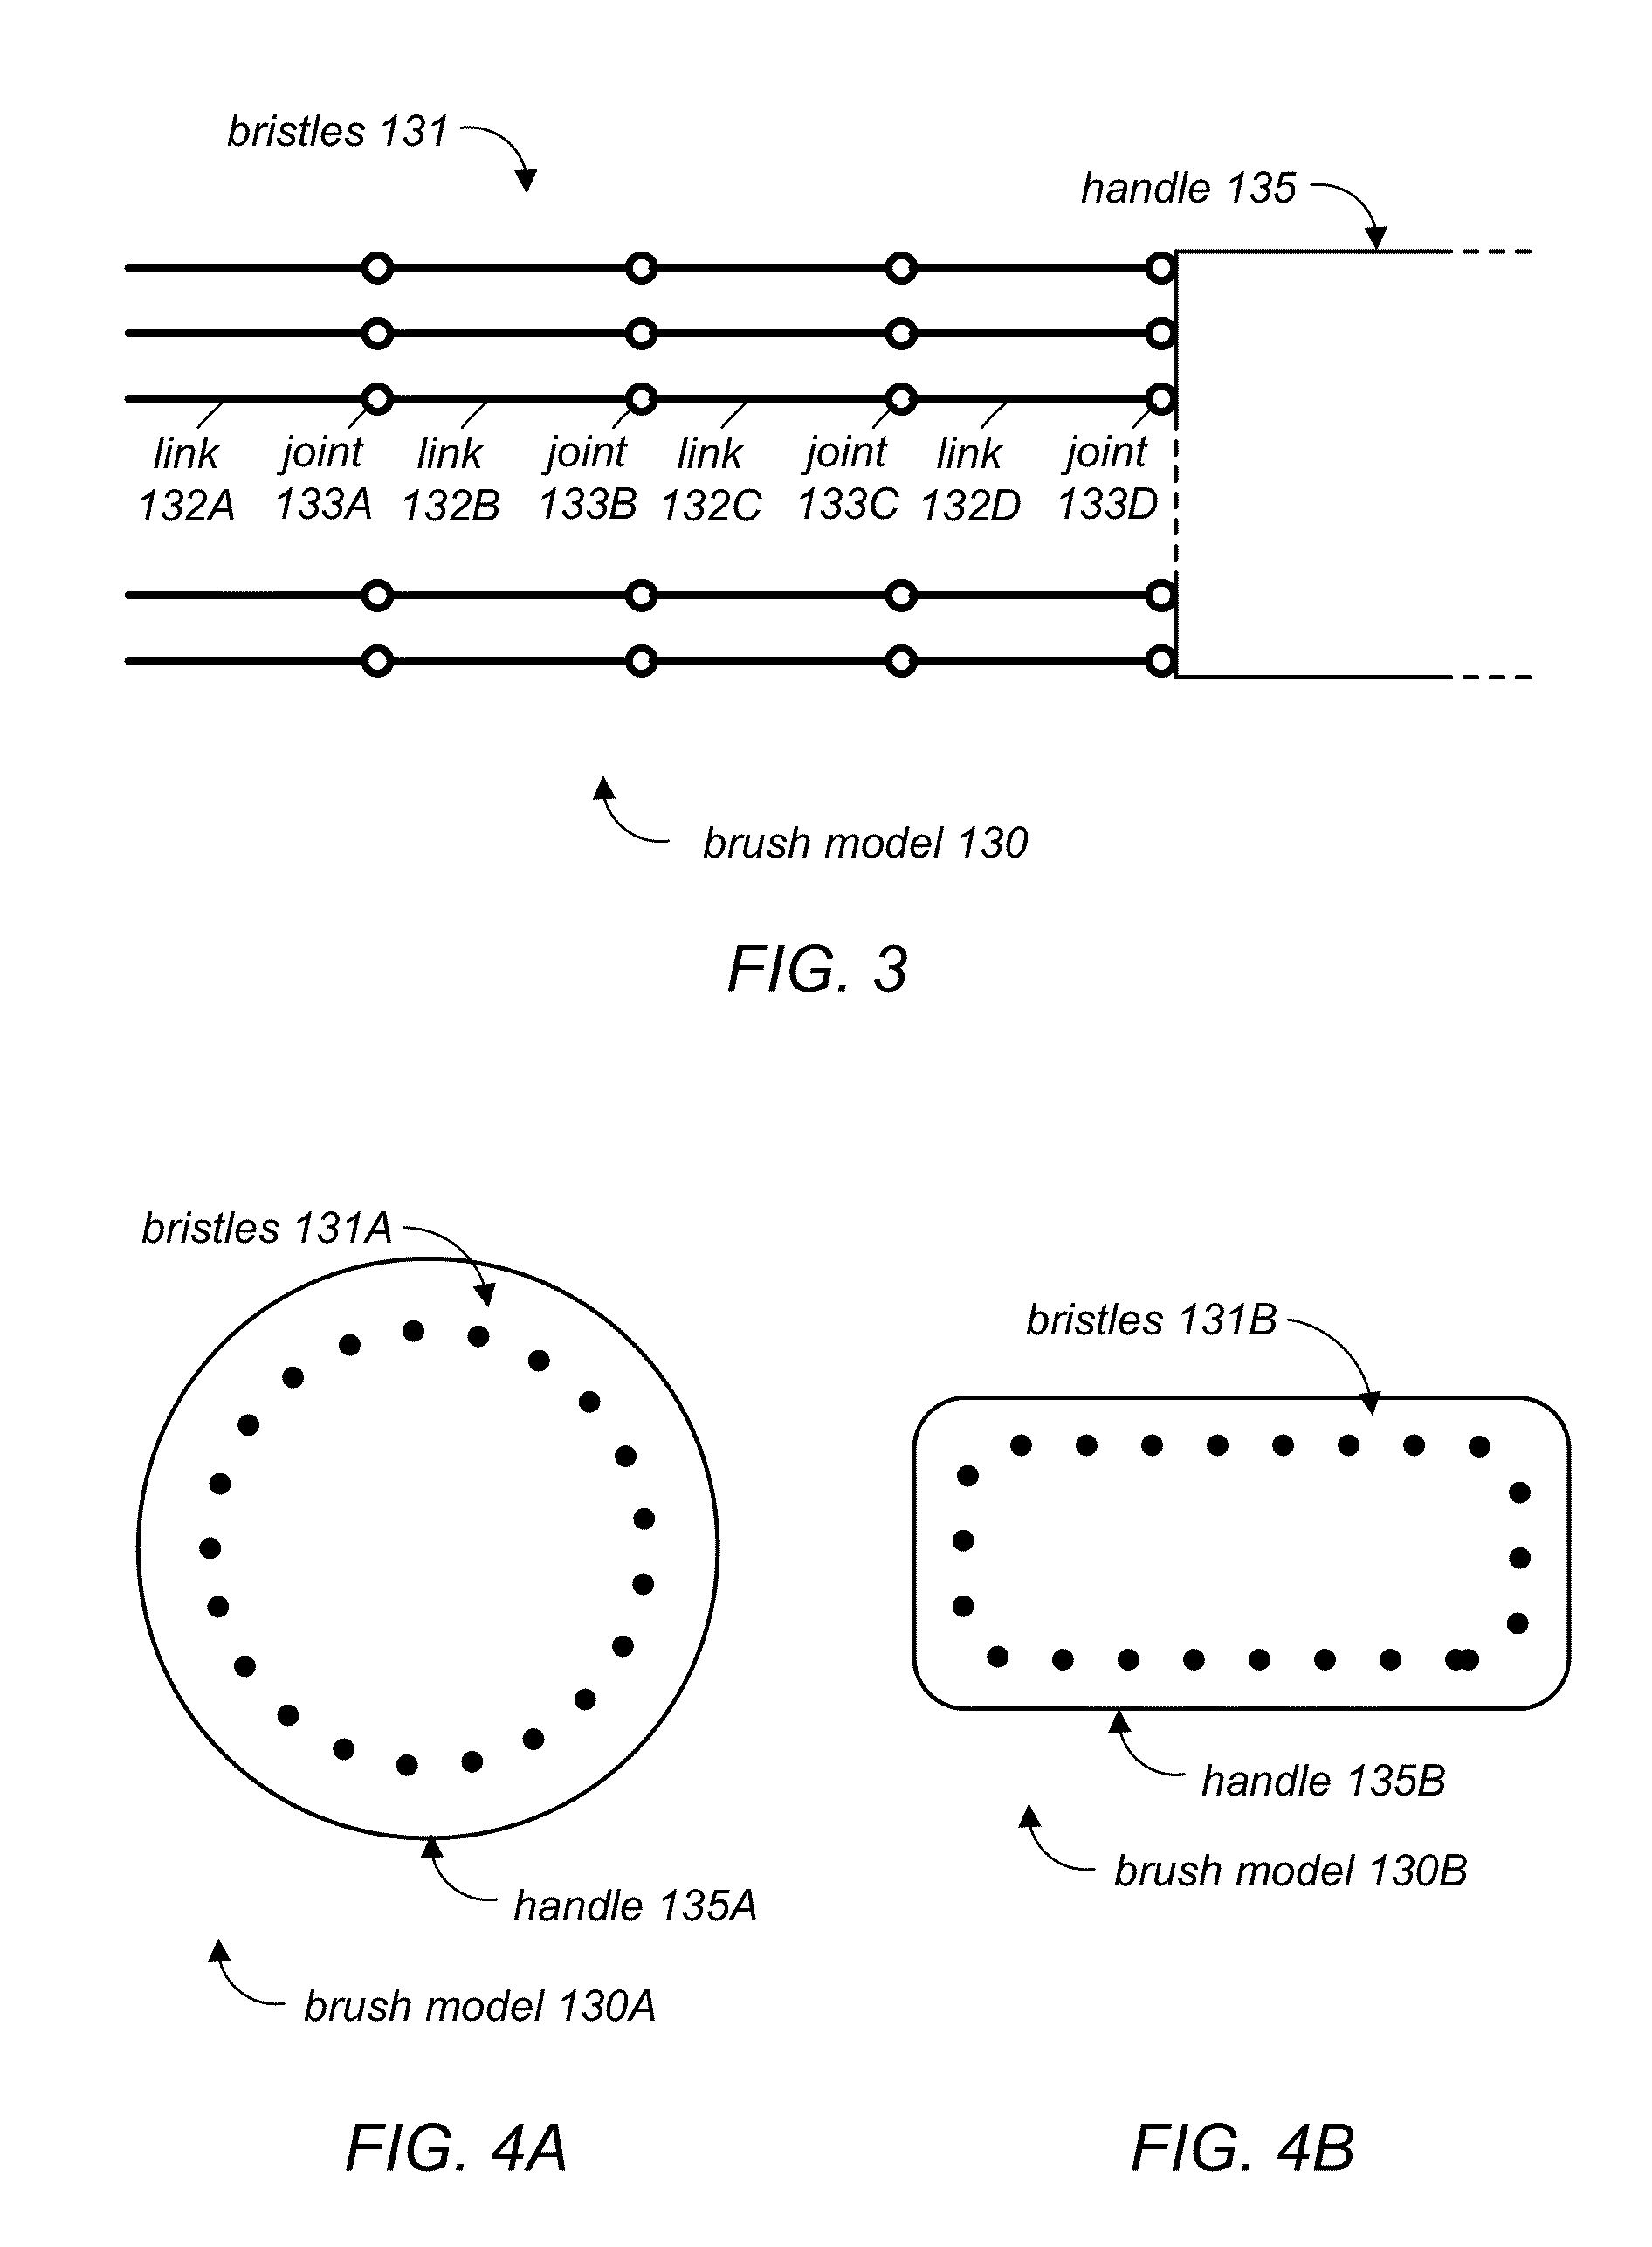 System and Method for Simulating Stiff Bristle Brushes Using Stiffness-Height Parameterization